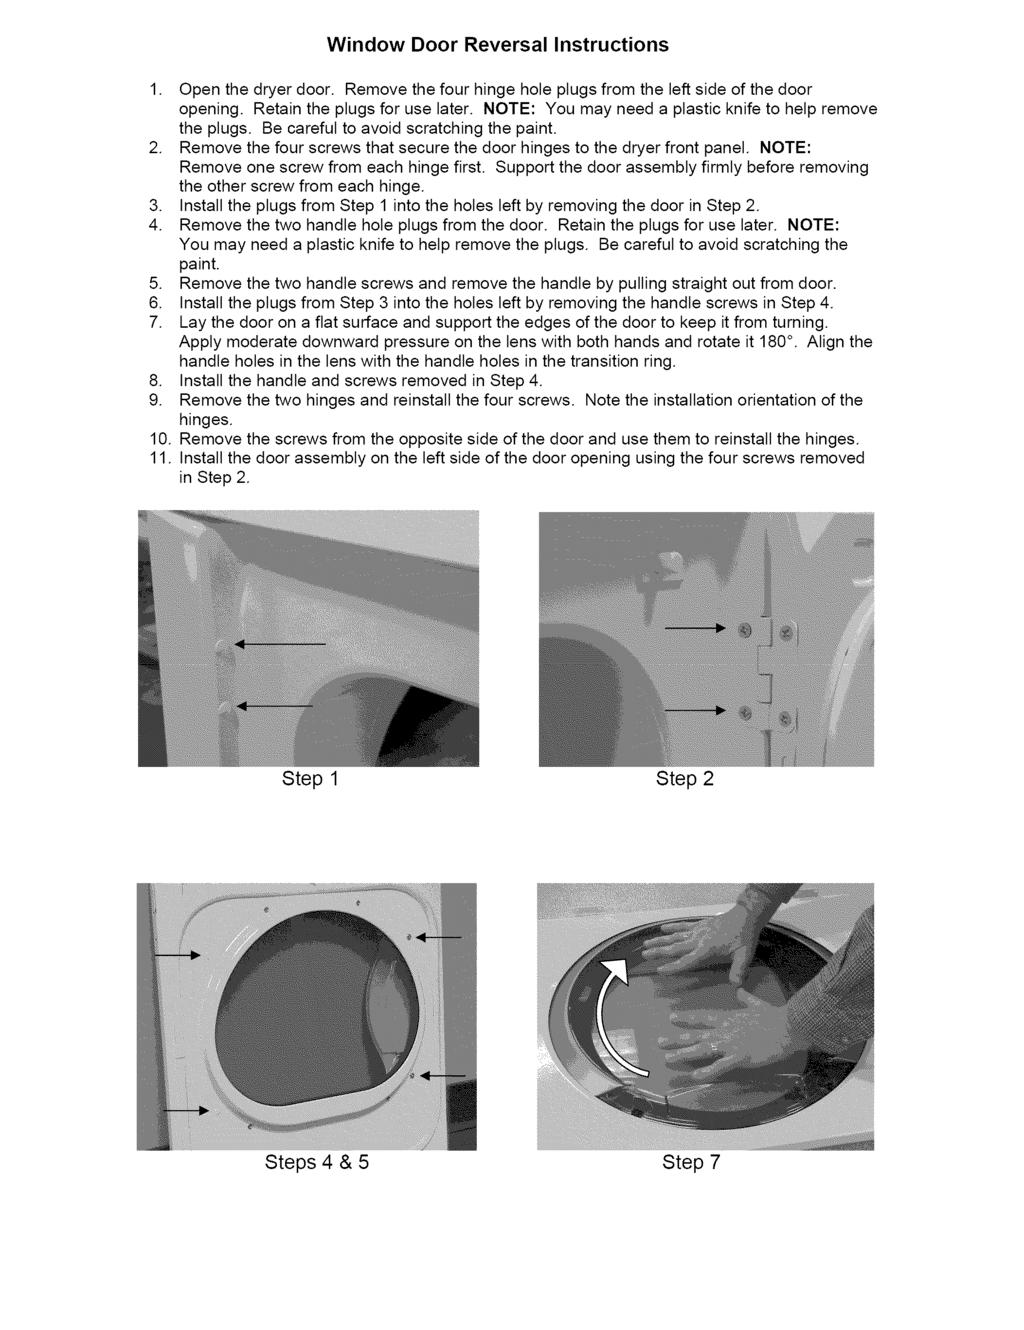 Window Door Reversal Instructions 1. Open the dryer door. Remove the four hinge hole plugs from the left side of the door opening. Retain the plugs for use later.